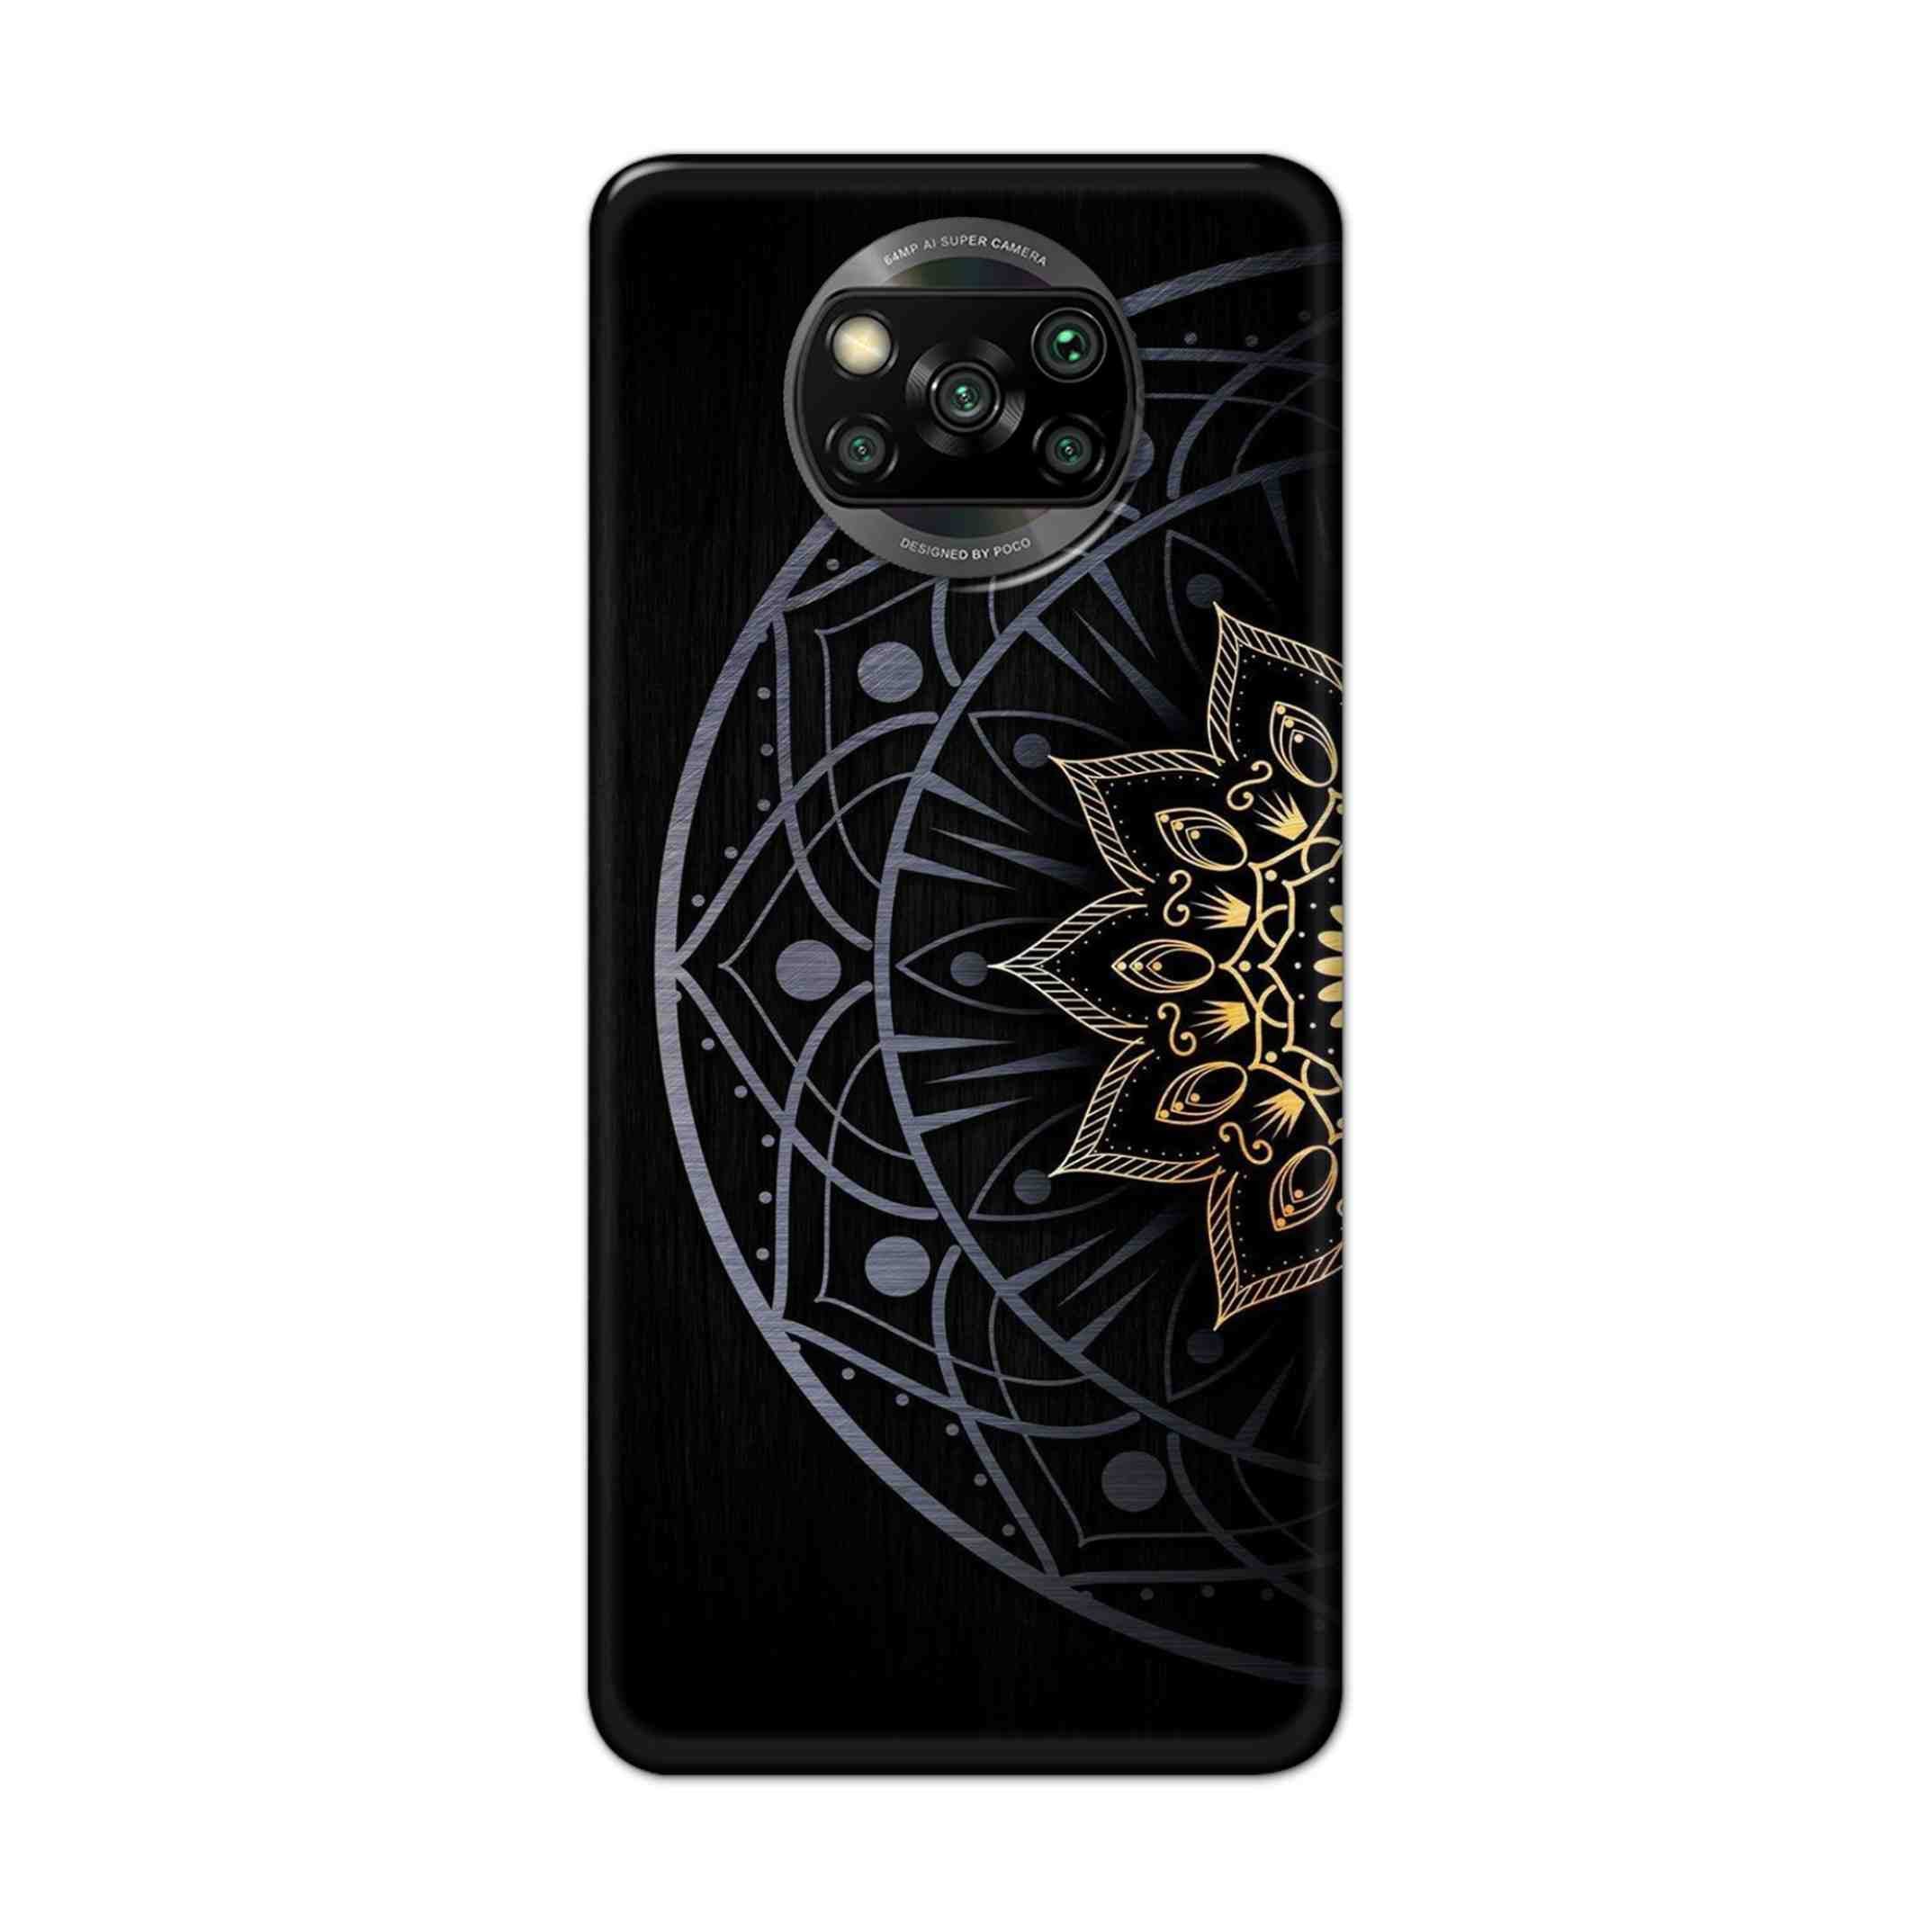 Buy Psychedelic Mandalas Hard Back Mobile Phone Case Cover For Pcoc X3 NFC Online